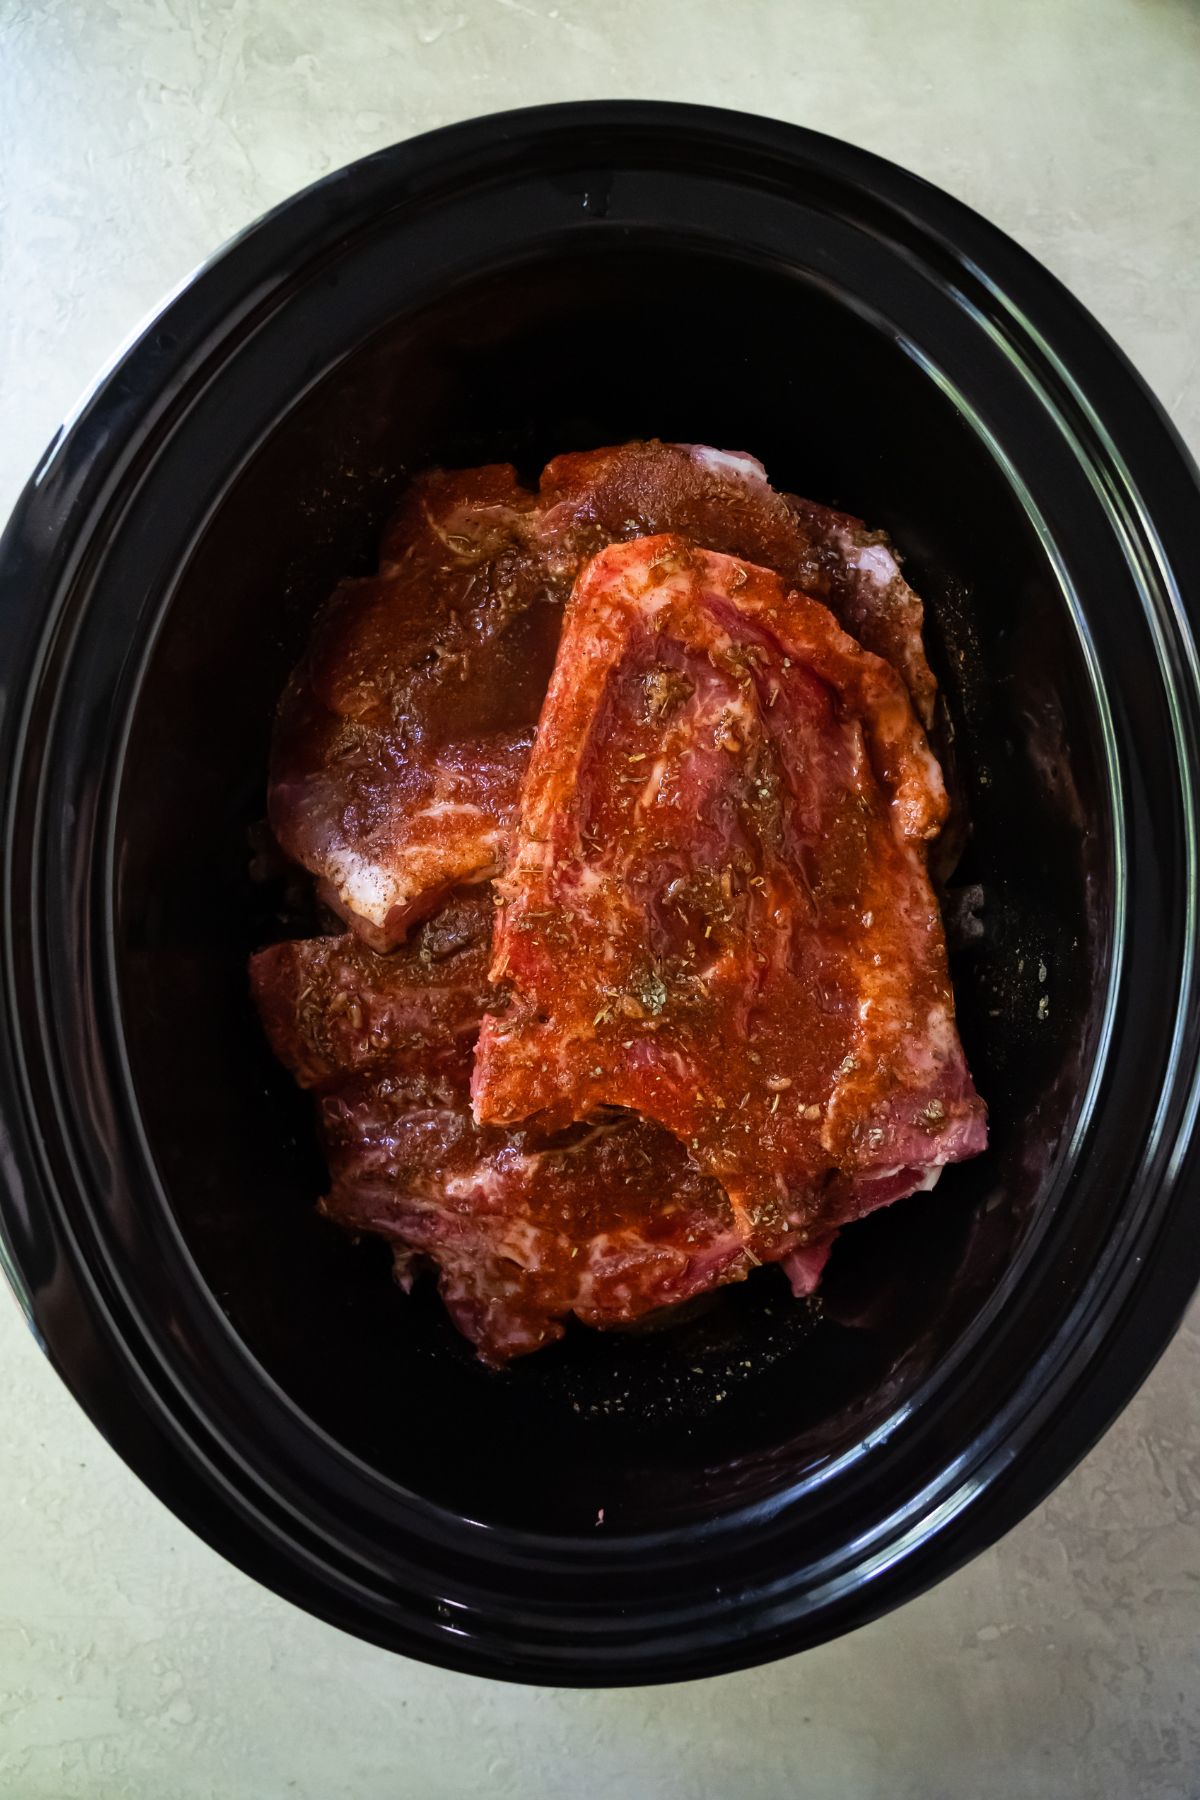 spices and broth poured over pork chops in a crockpot